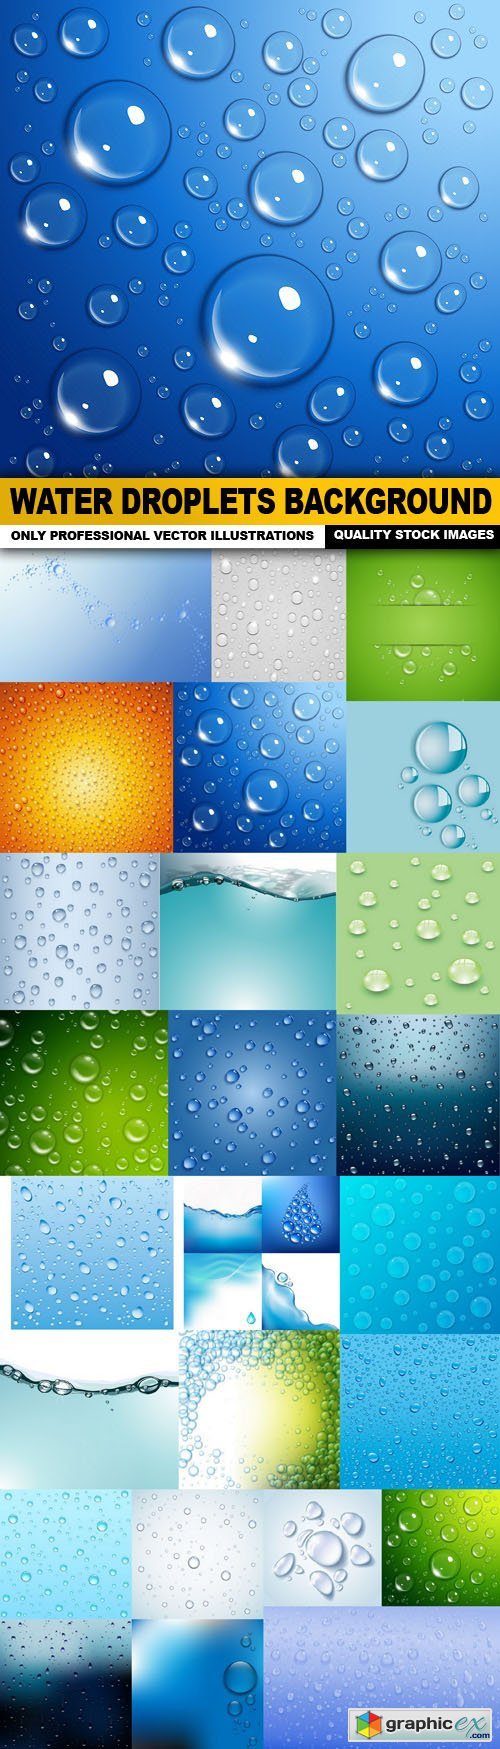 Water Droplets Background - 25 Vector